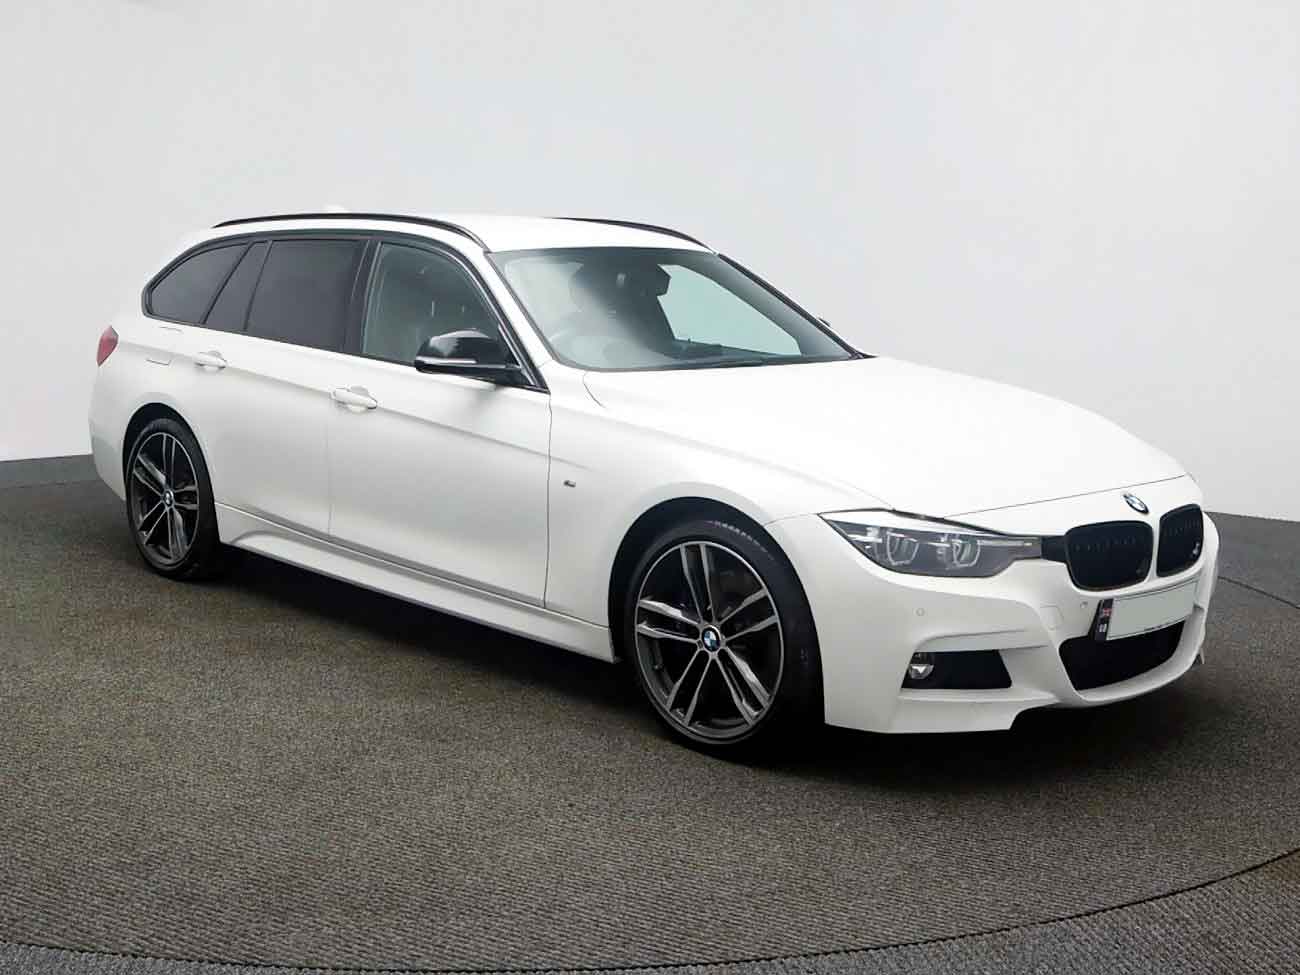 Front view of Carbase BMW 3 series Touring